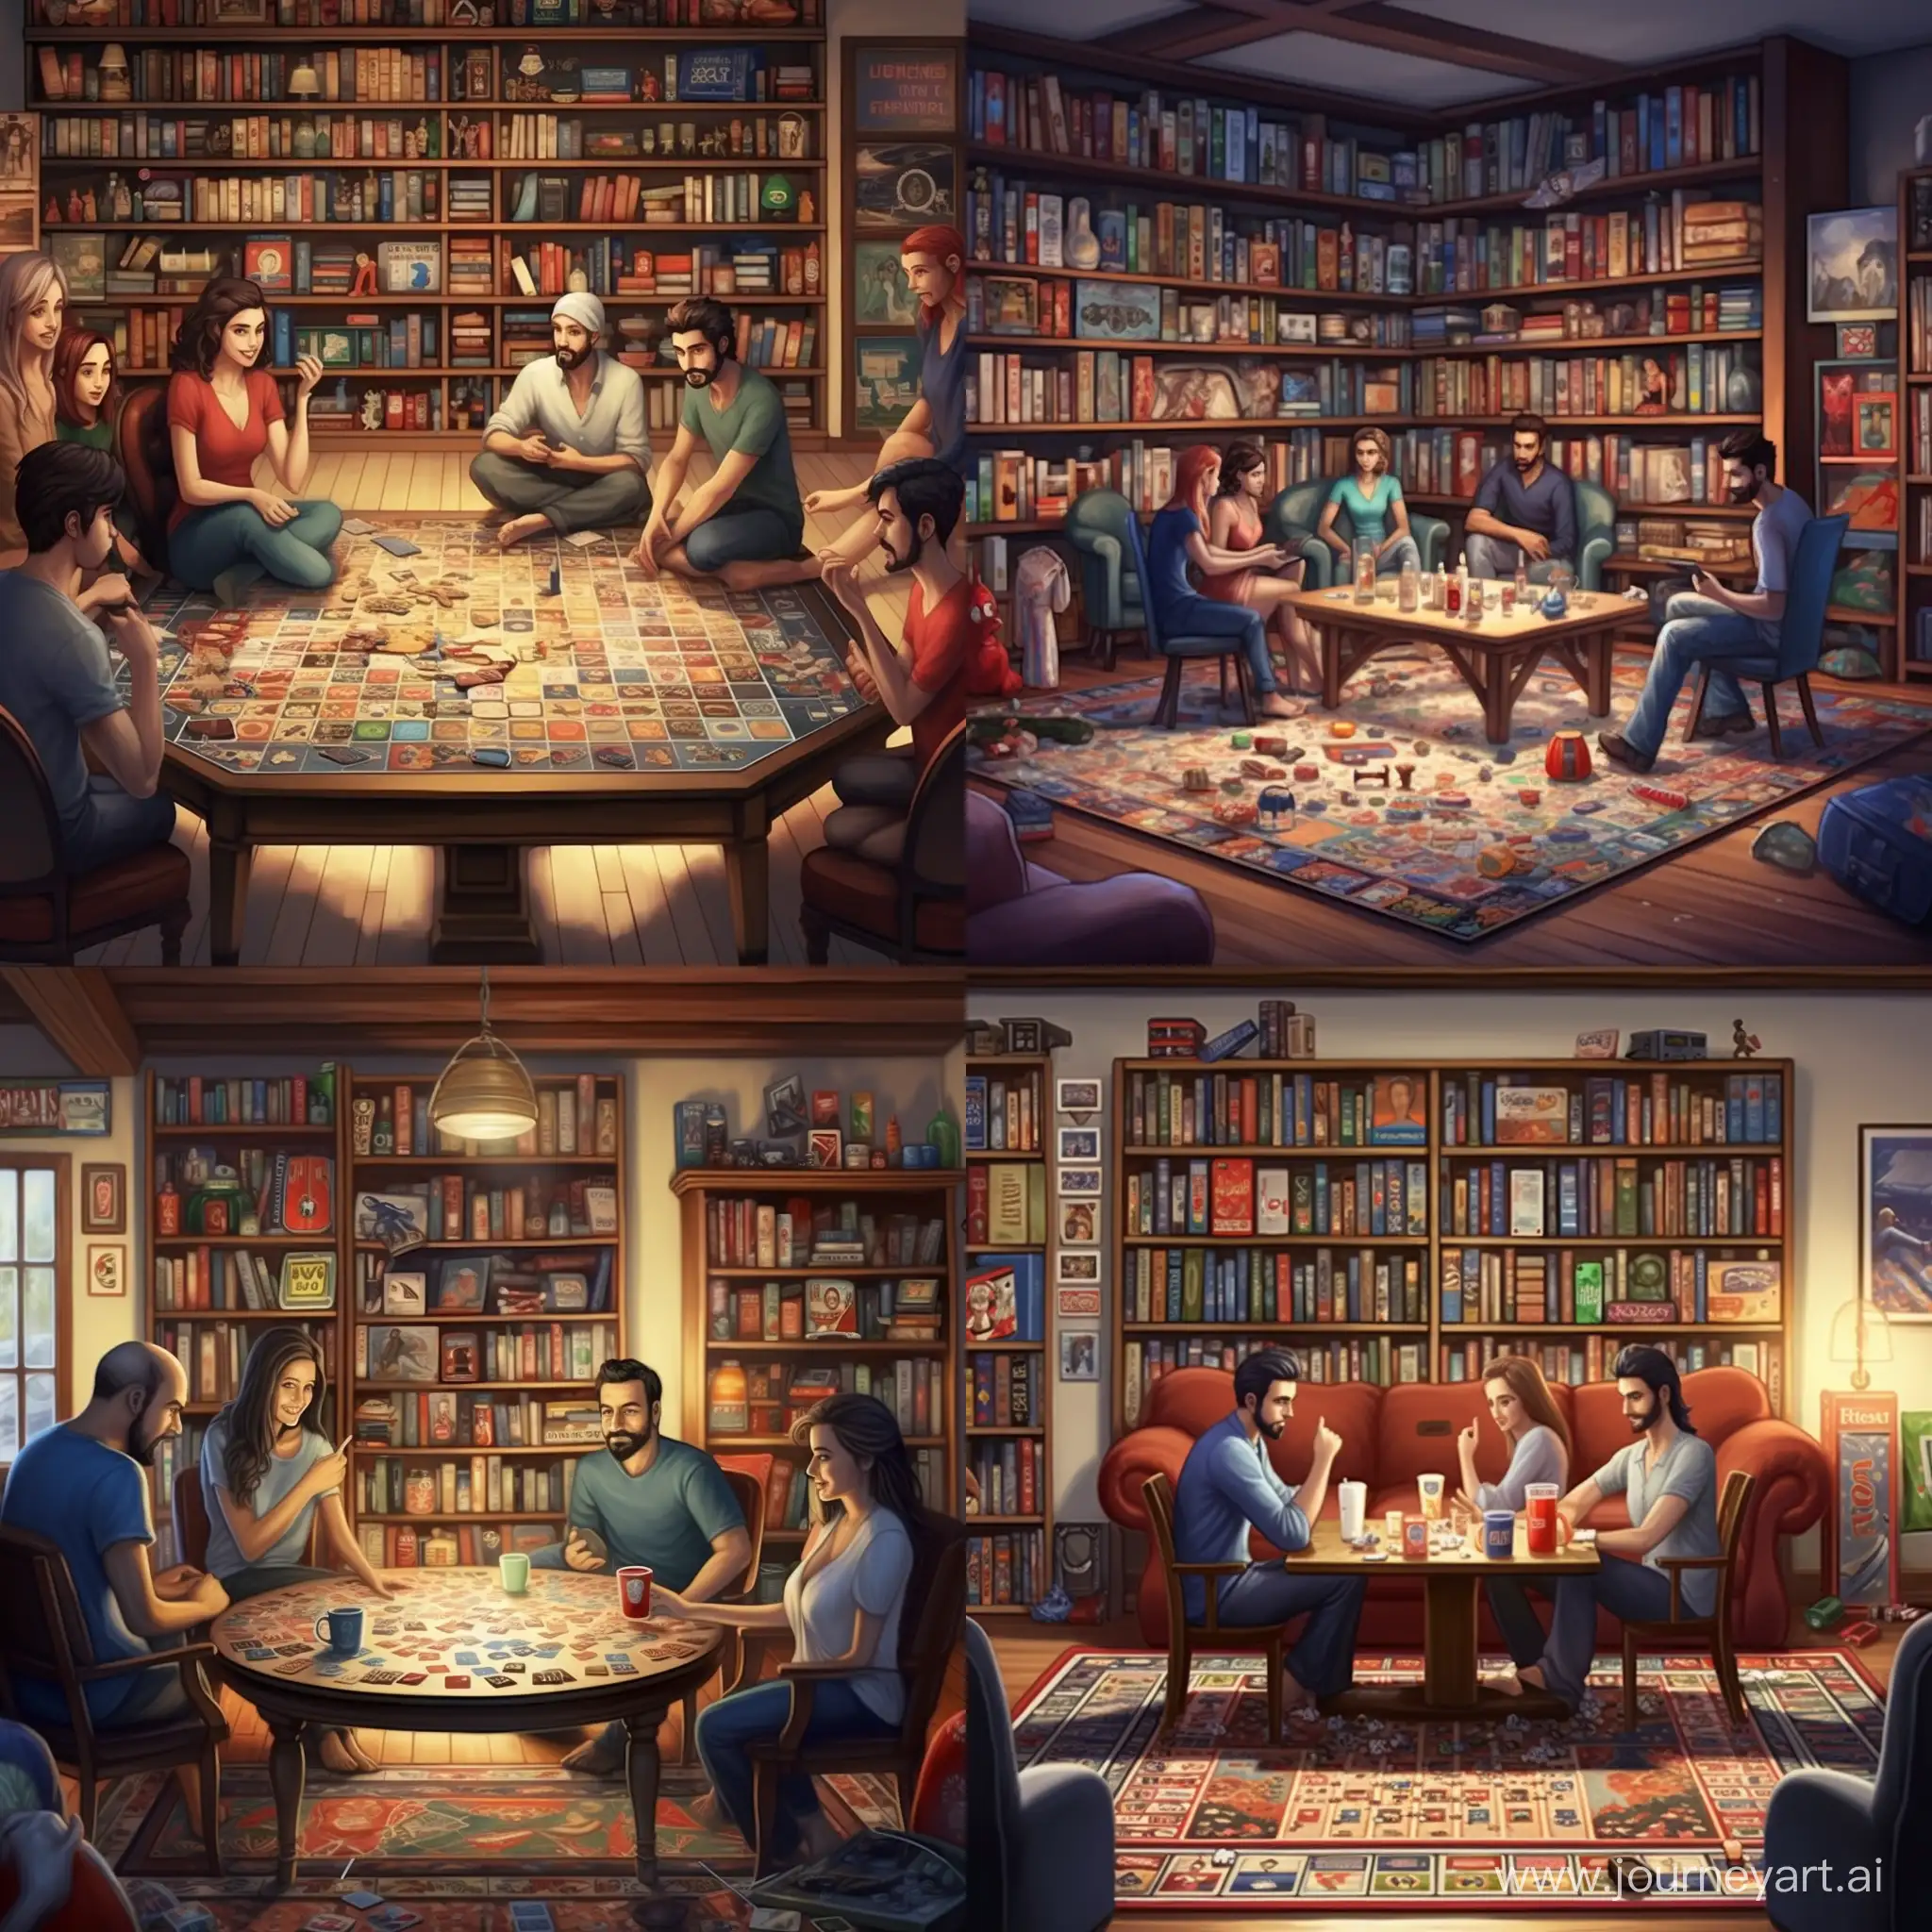 Friends-Enjoying-HyperRealistic-Board-Game-Party-in-Cozy-Living-Room